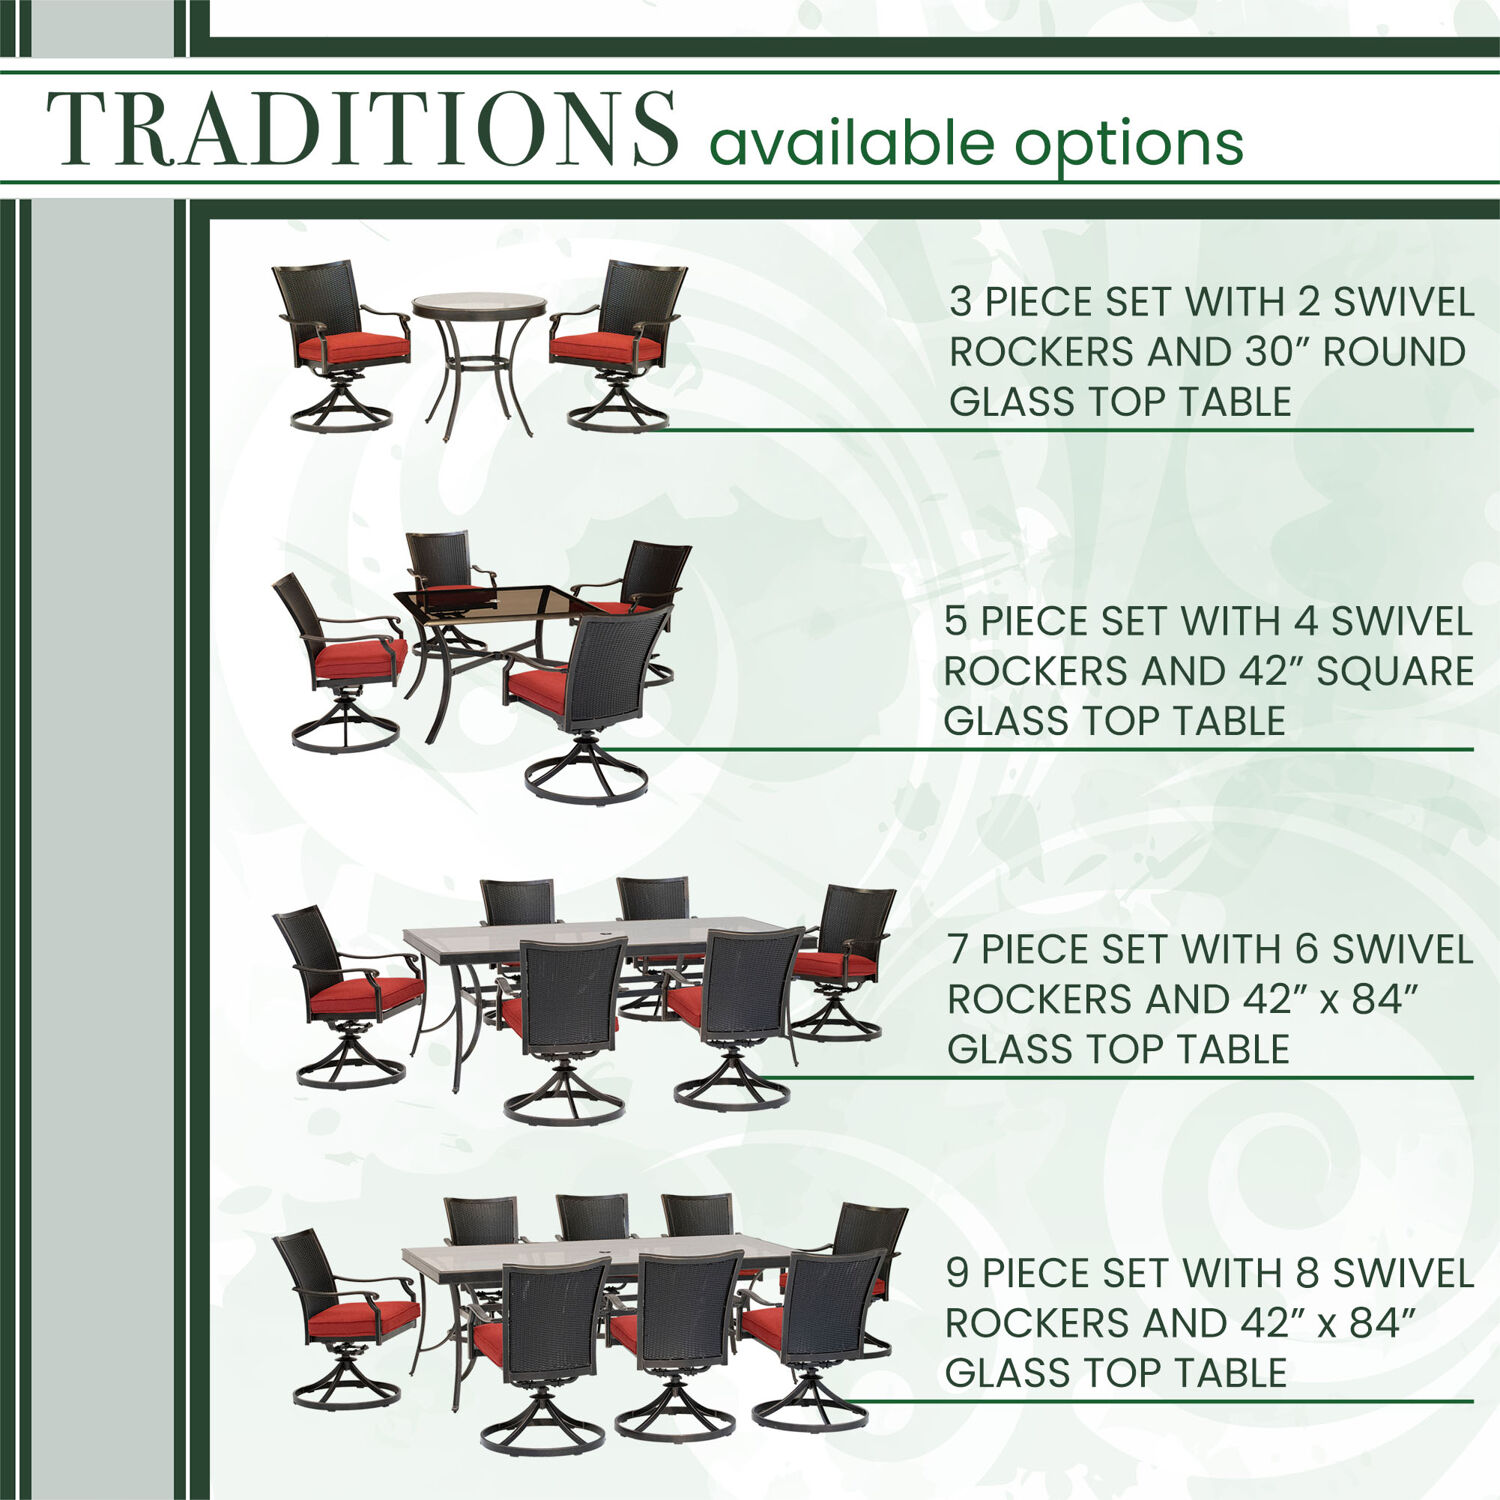 Hanover Traditions 7-Piece Outdoor Furniture Patio Dining Set, 6 Cushioned Wicker Back Cast Aluminum Swivel Rocker Chairs and Large 42"X84" Glass Tabl - image 4 of 9